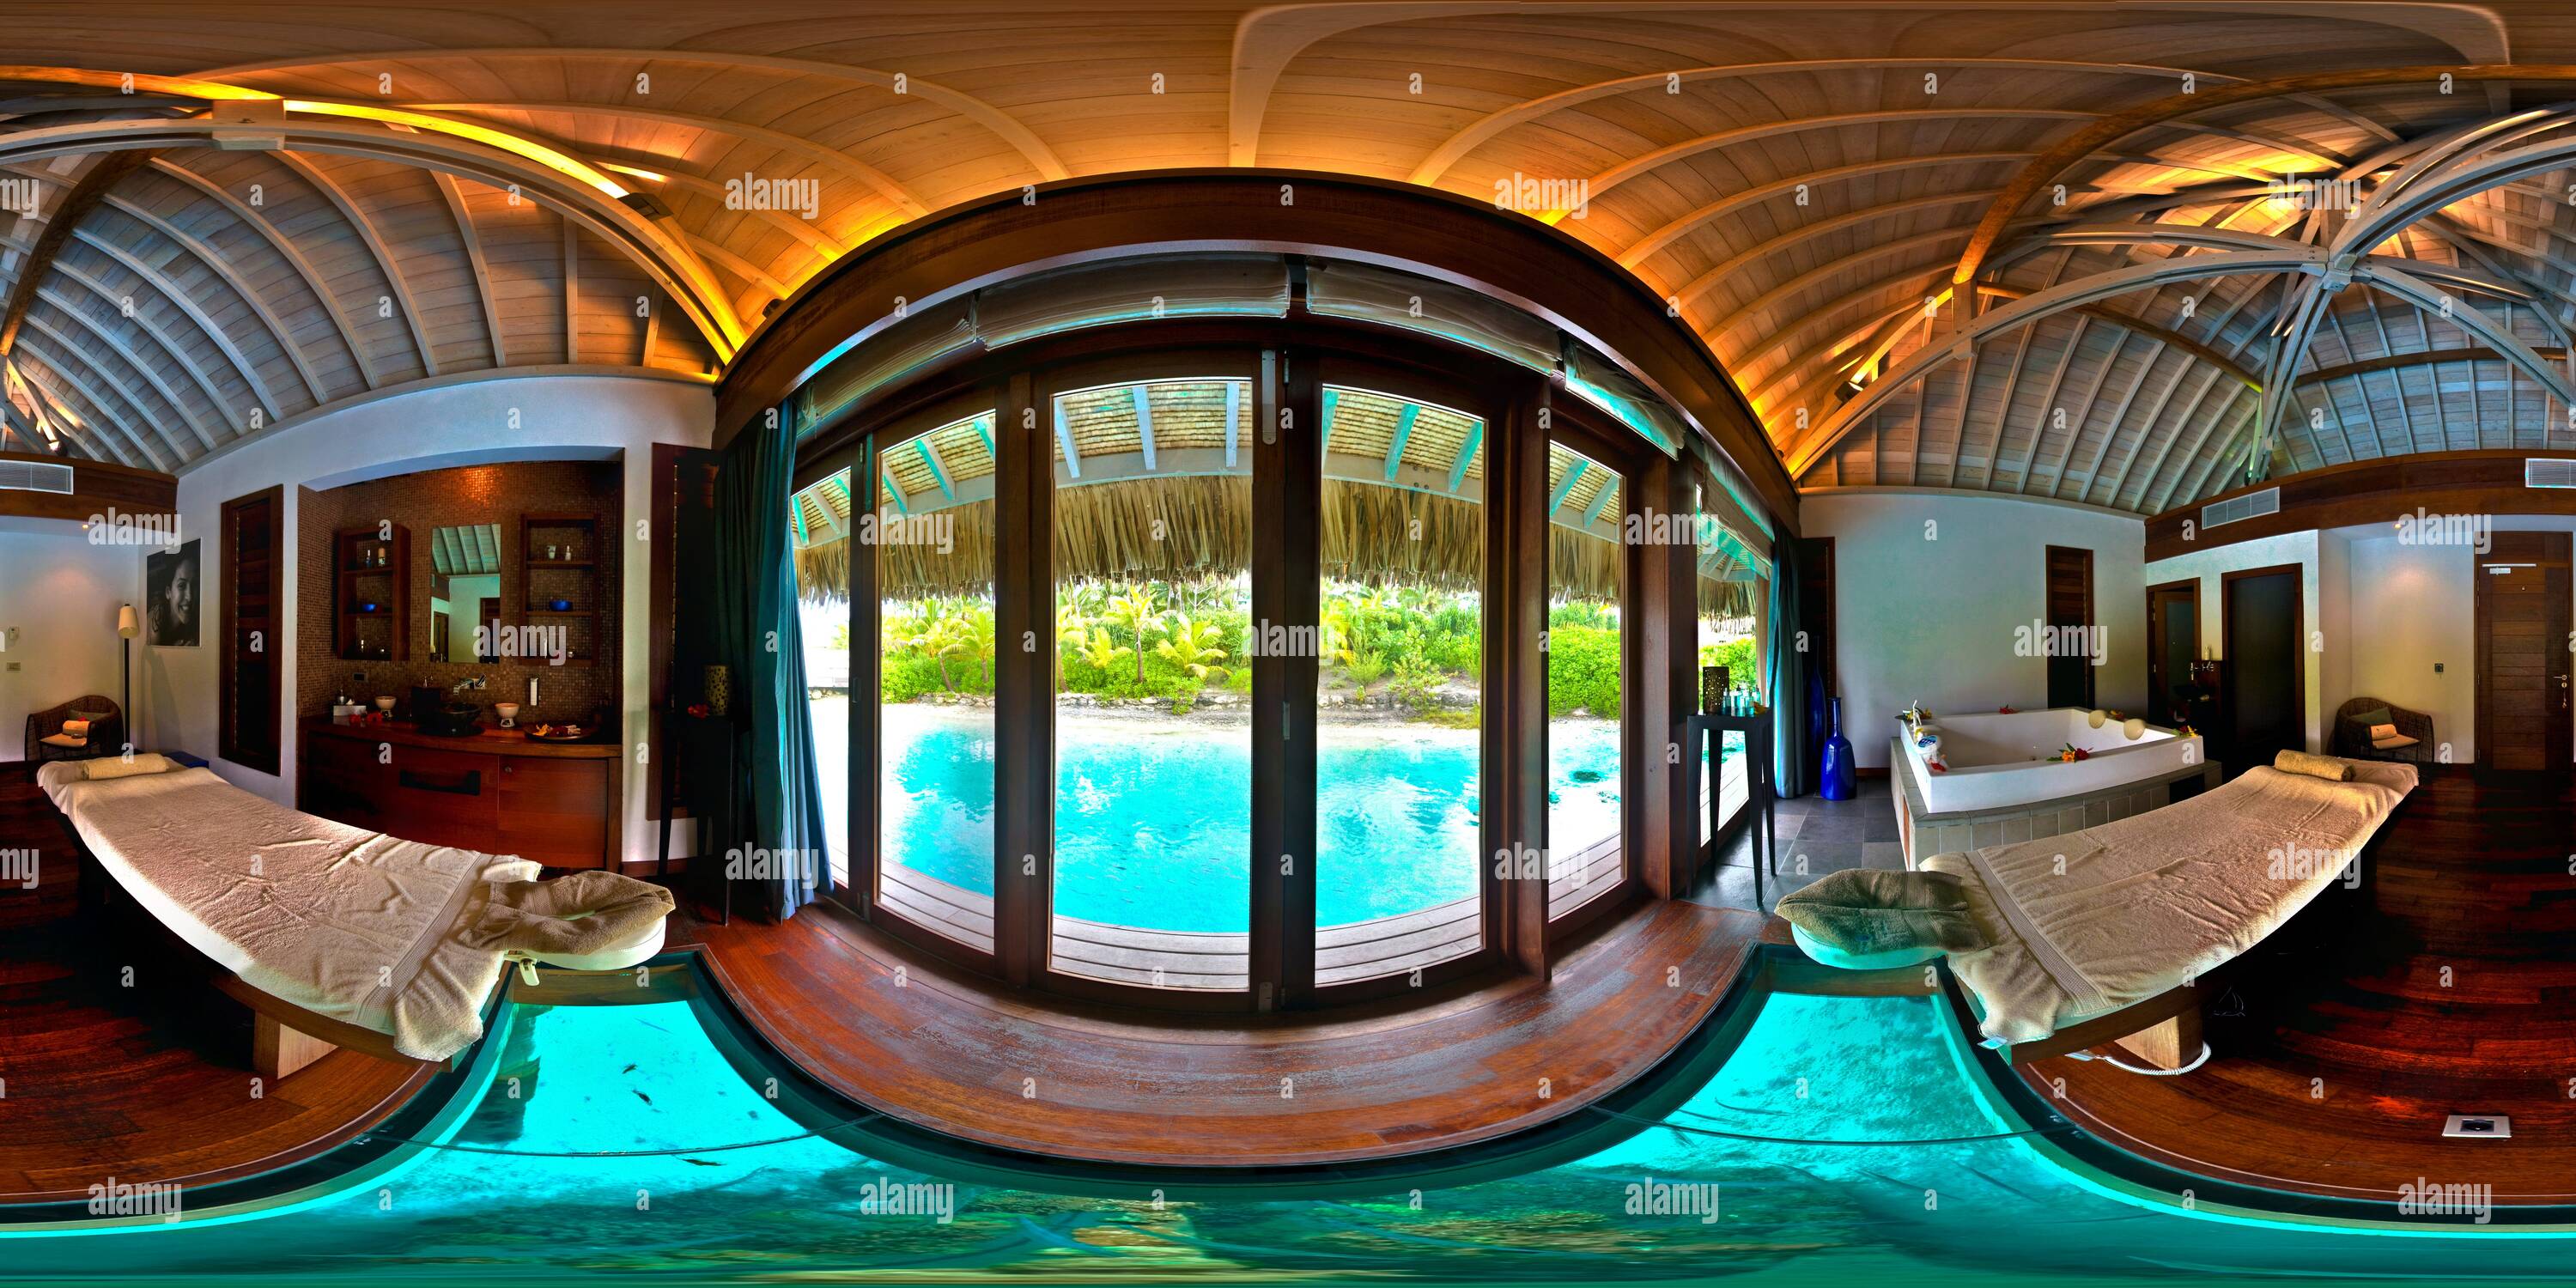 360° view of Deep Ocean Spa : Over Water Bungalow Jacuzzi - Alamy